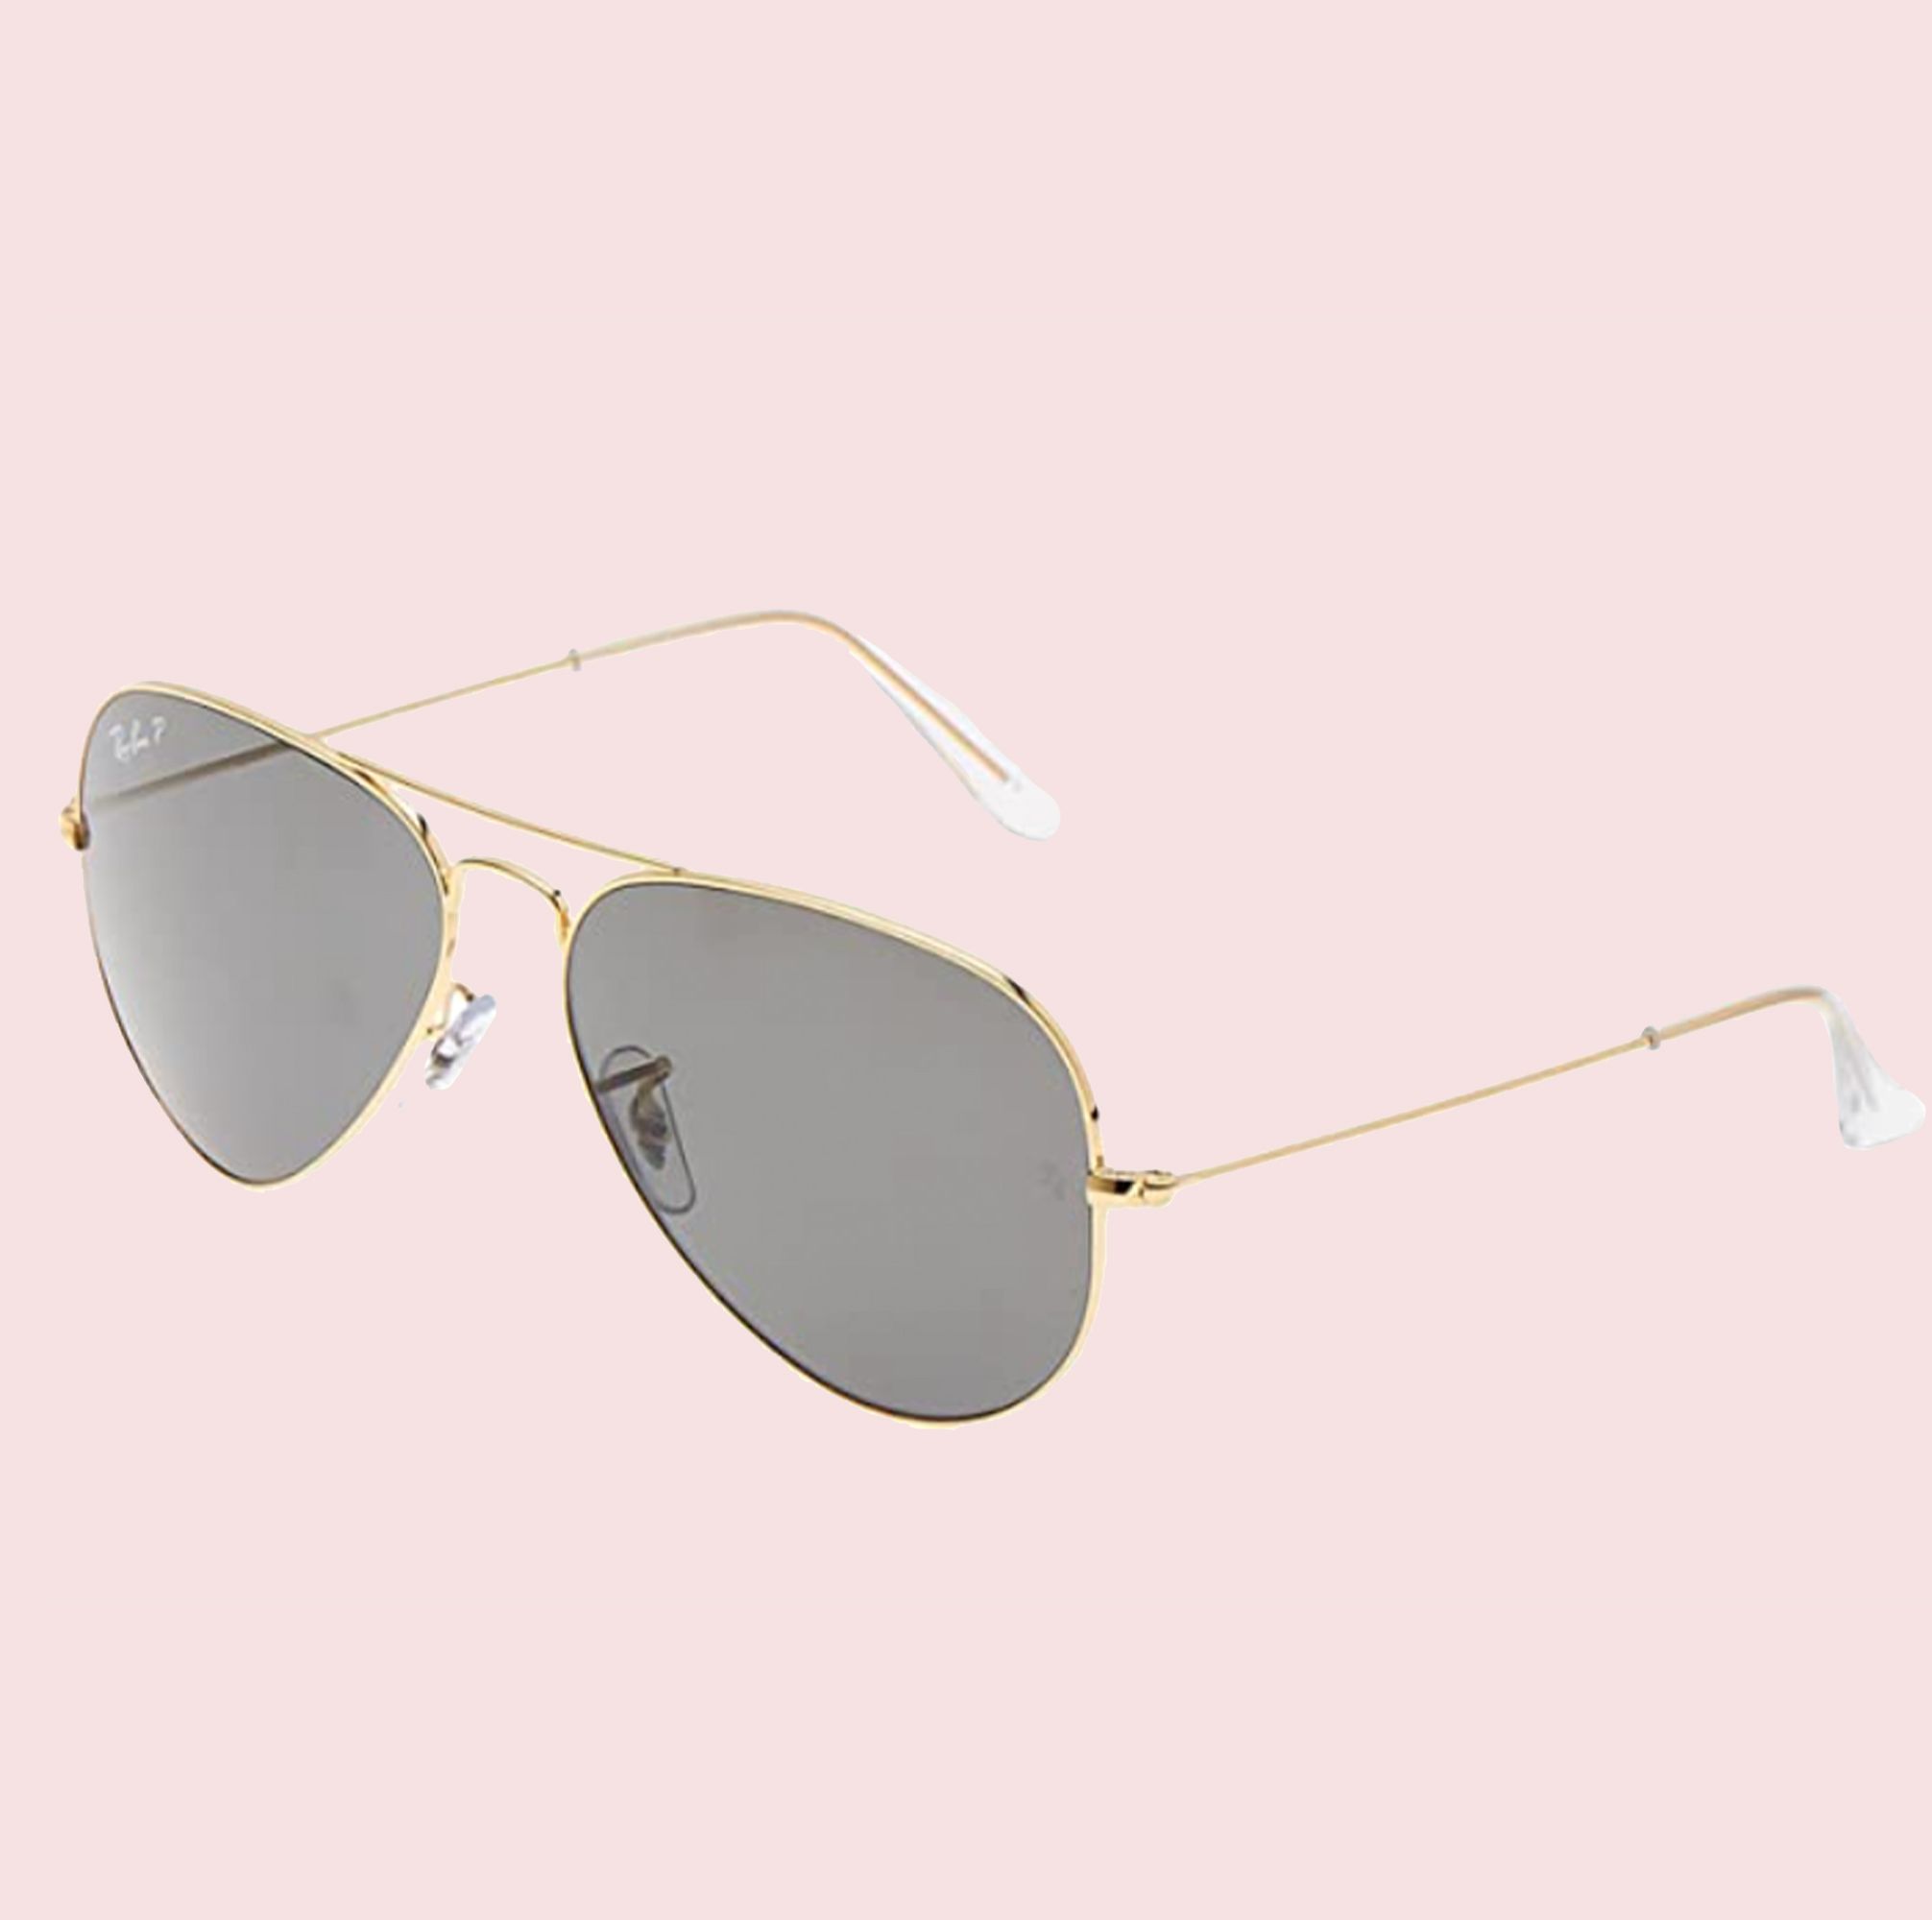 20 Aviator Sunglasses That'll Make You Look Cool as Hell All Summer Long